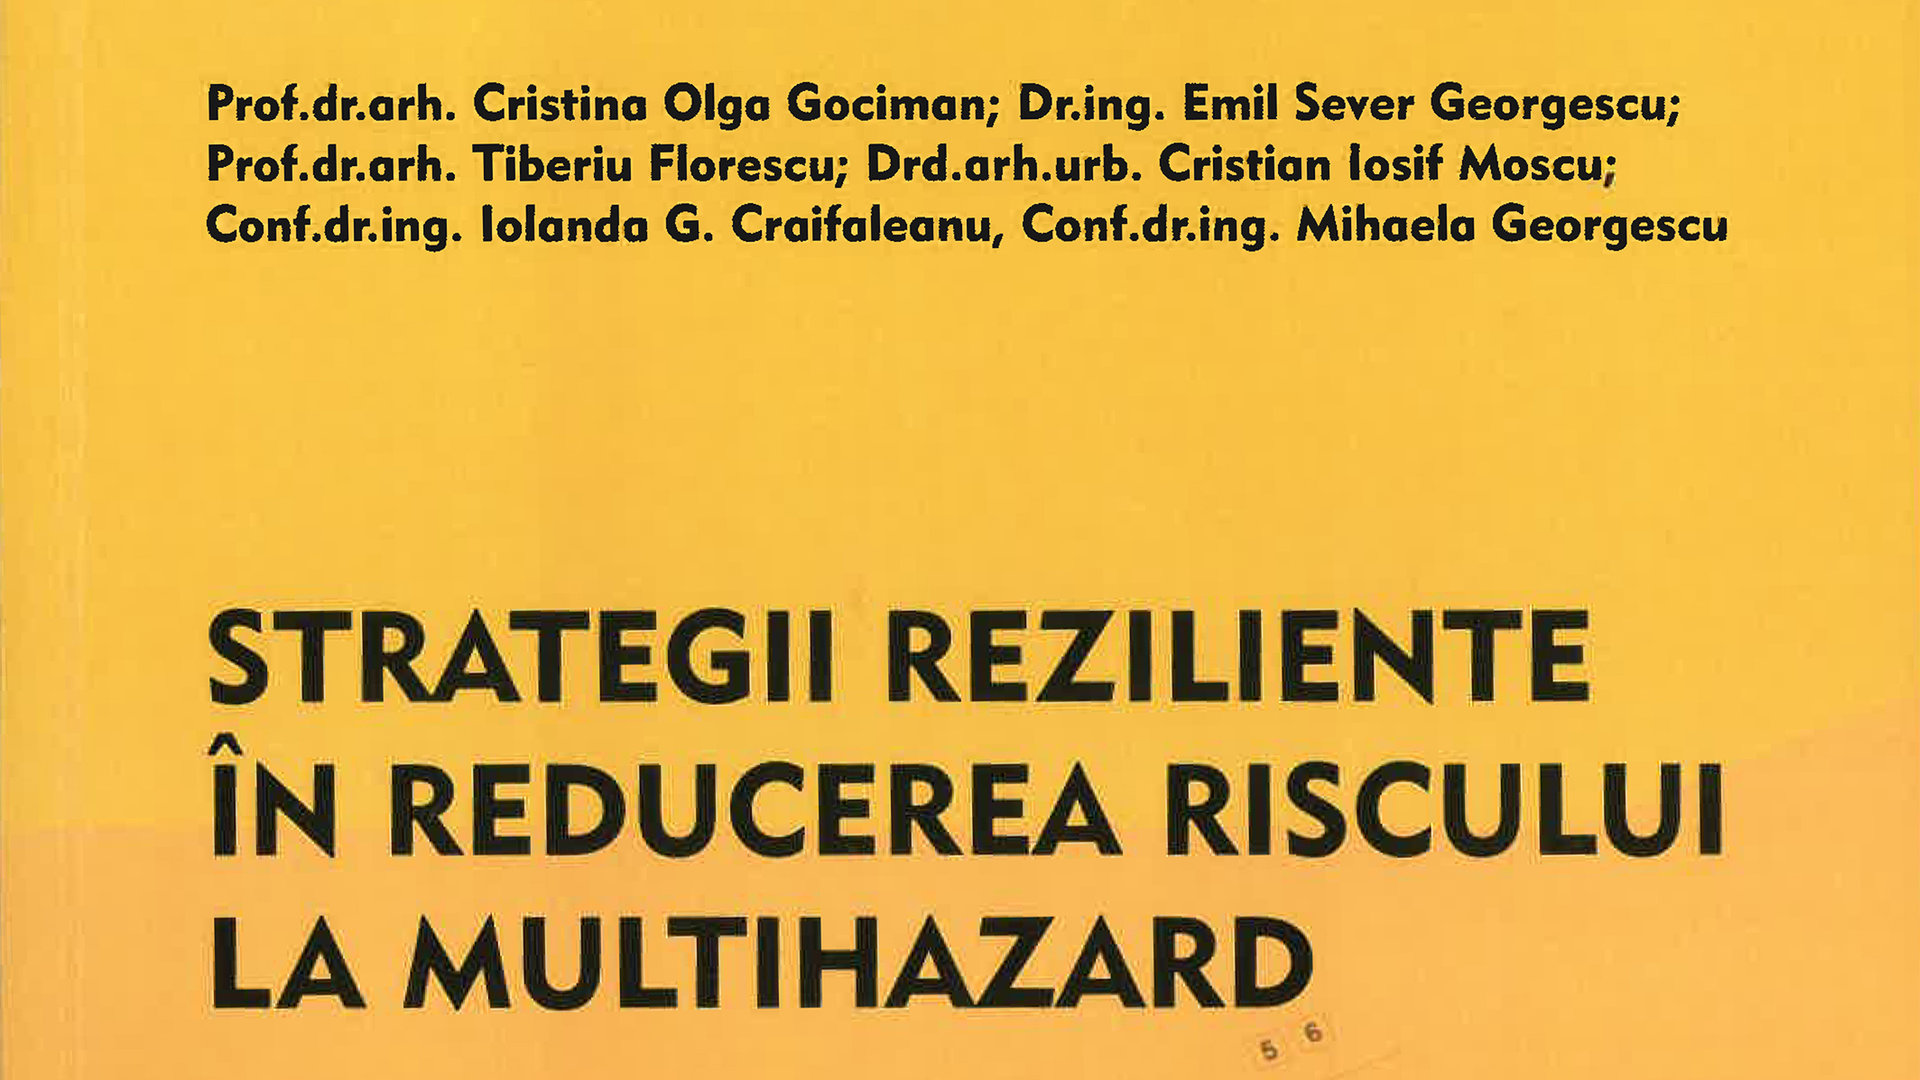 Strategies, resiliences in multihazard risk reduction